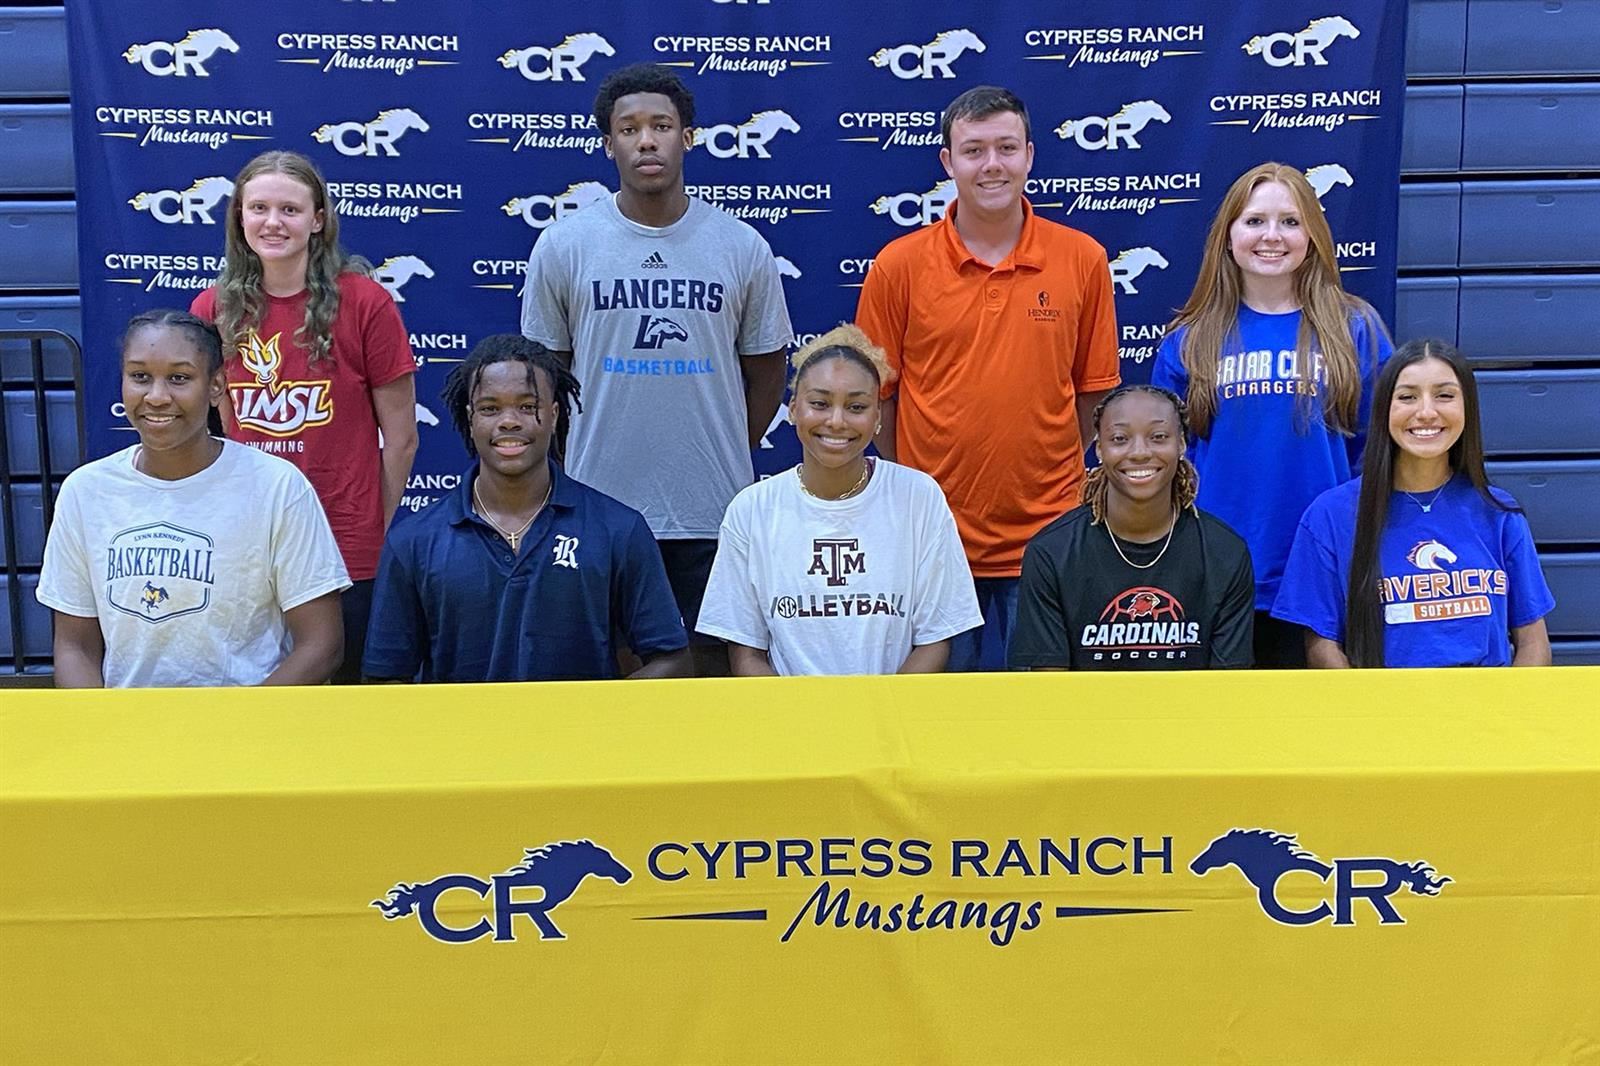 Nine Cypress Ranch High School seniors were among 51 student-athletes across CFISD to sign letters of intent.